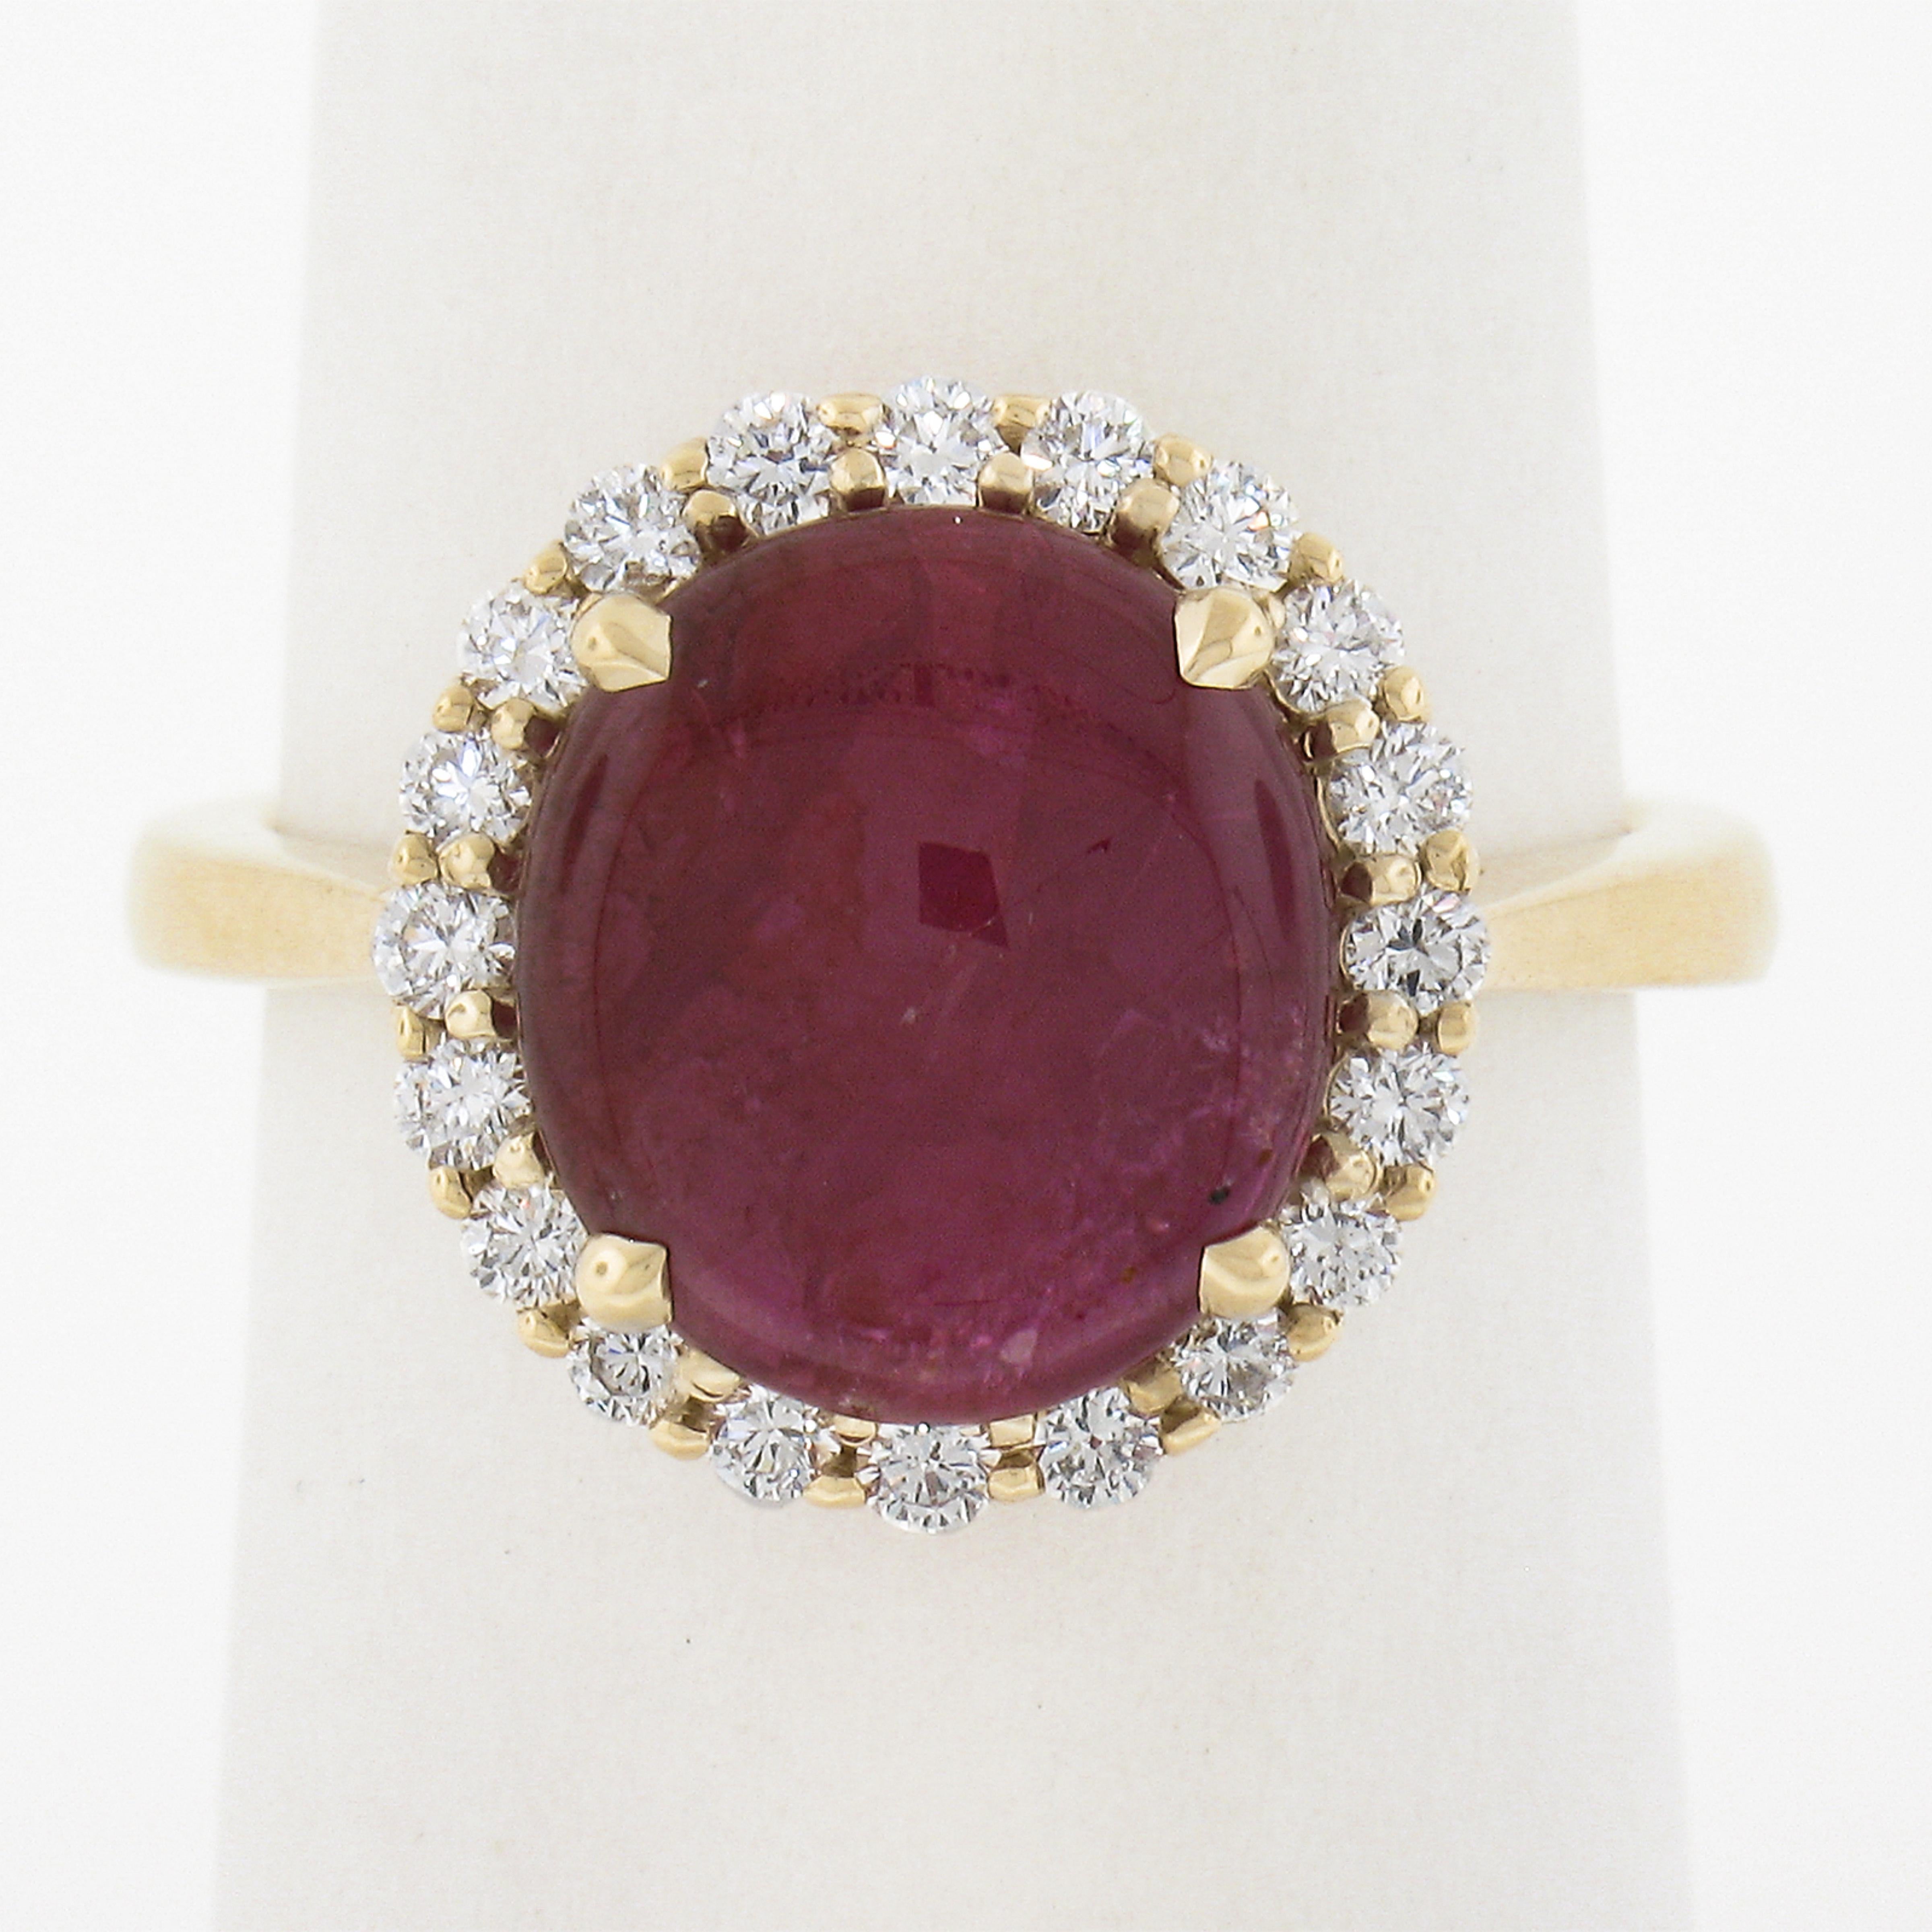 This ruby and diamond ring is well crafted in solid 14k yellow gold. The elegant halo cluster design is set with a GIA certified natural ruby has no heat treatment. It is surrounded by a halo of 20 fine quality round brilliant cut diamonds that